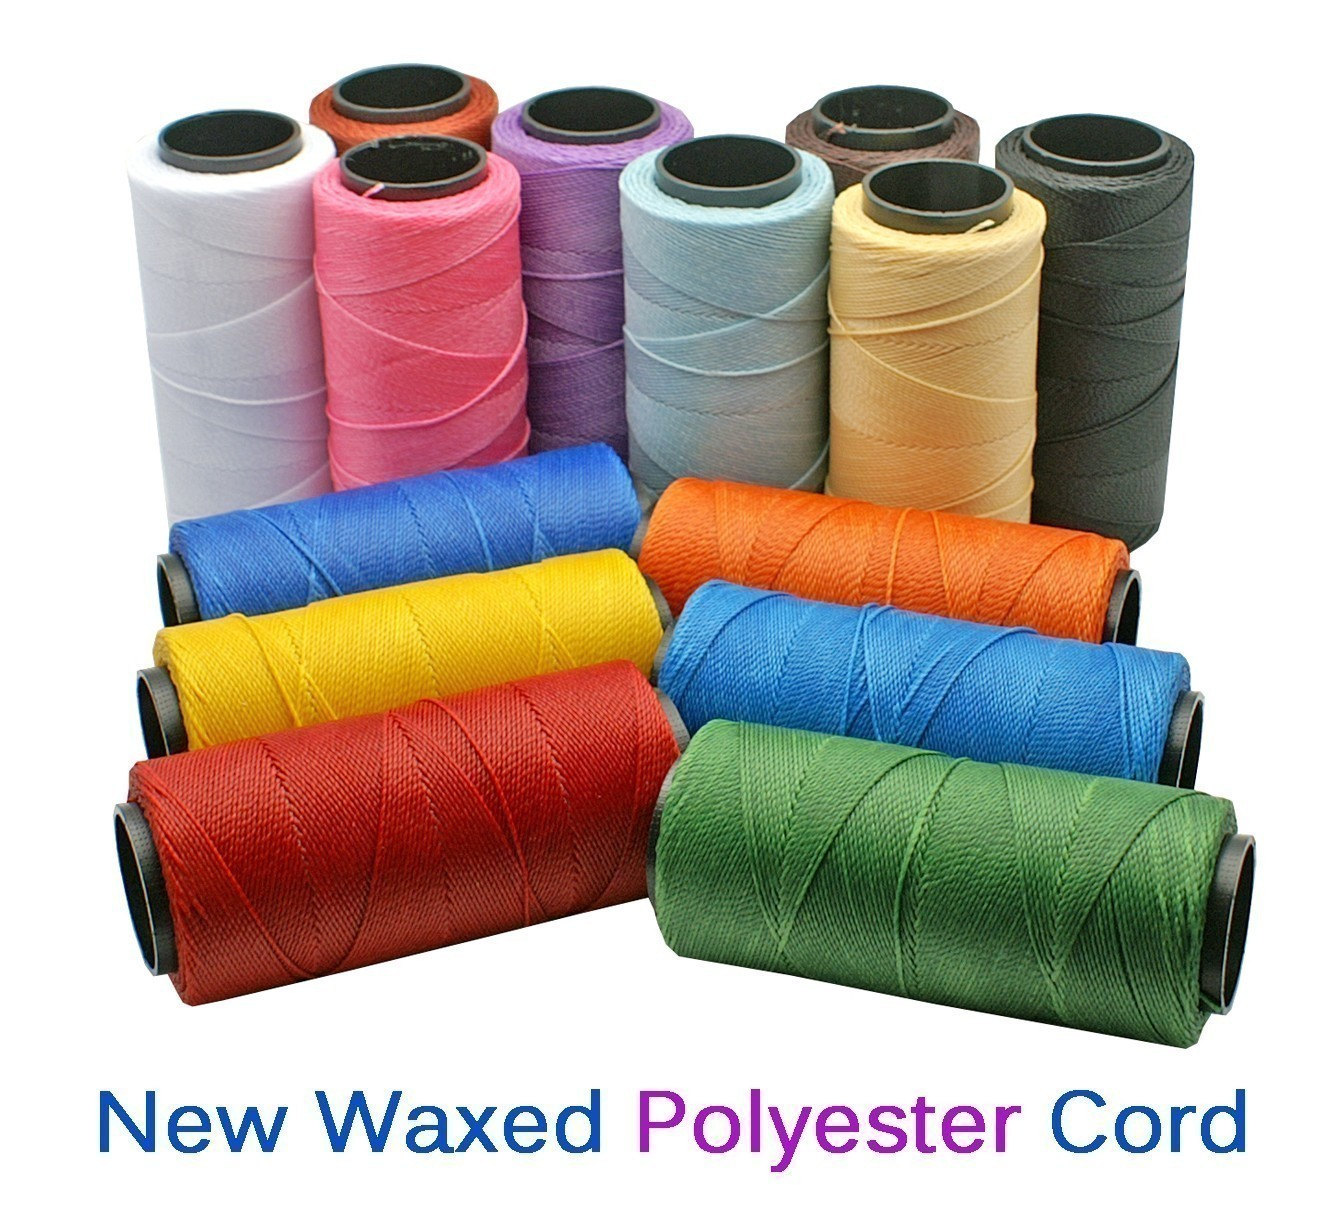 Multi Color Mix: 2-ply Waxed Polyester Cord, 1mm X 12 Packs of 25 Feet per  Color 8.33 Yards / Hilo Encerado, Macrame Thread, Supplies 